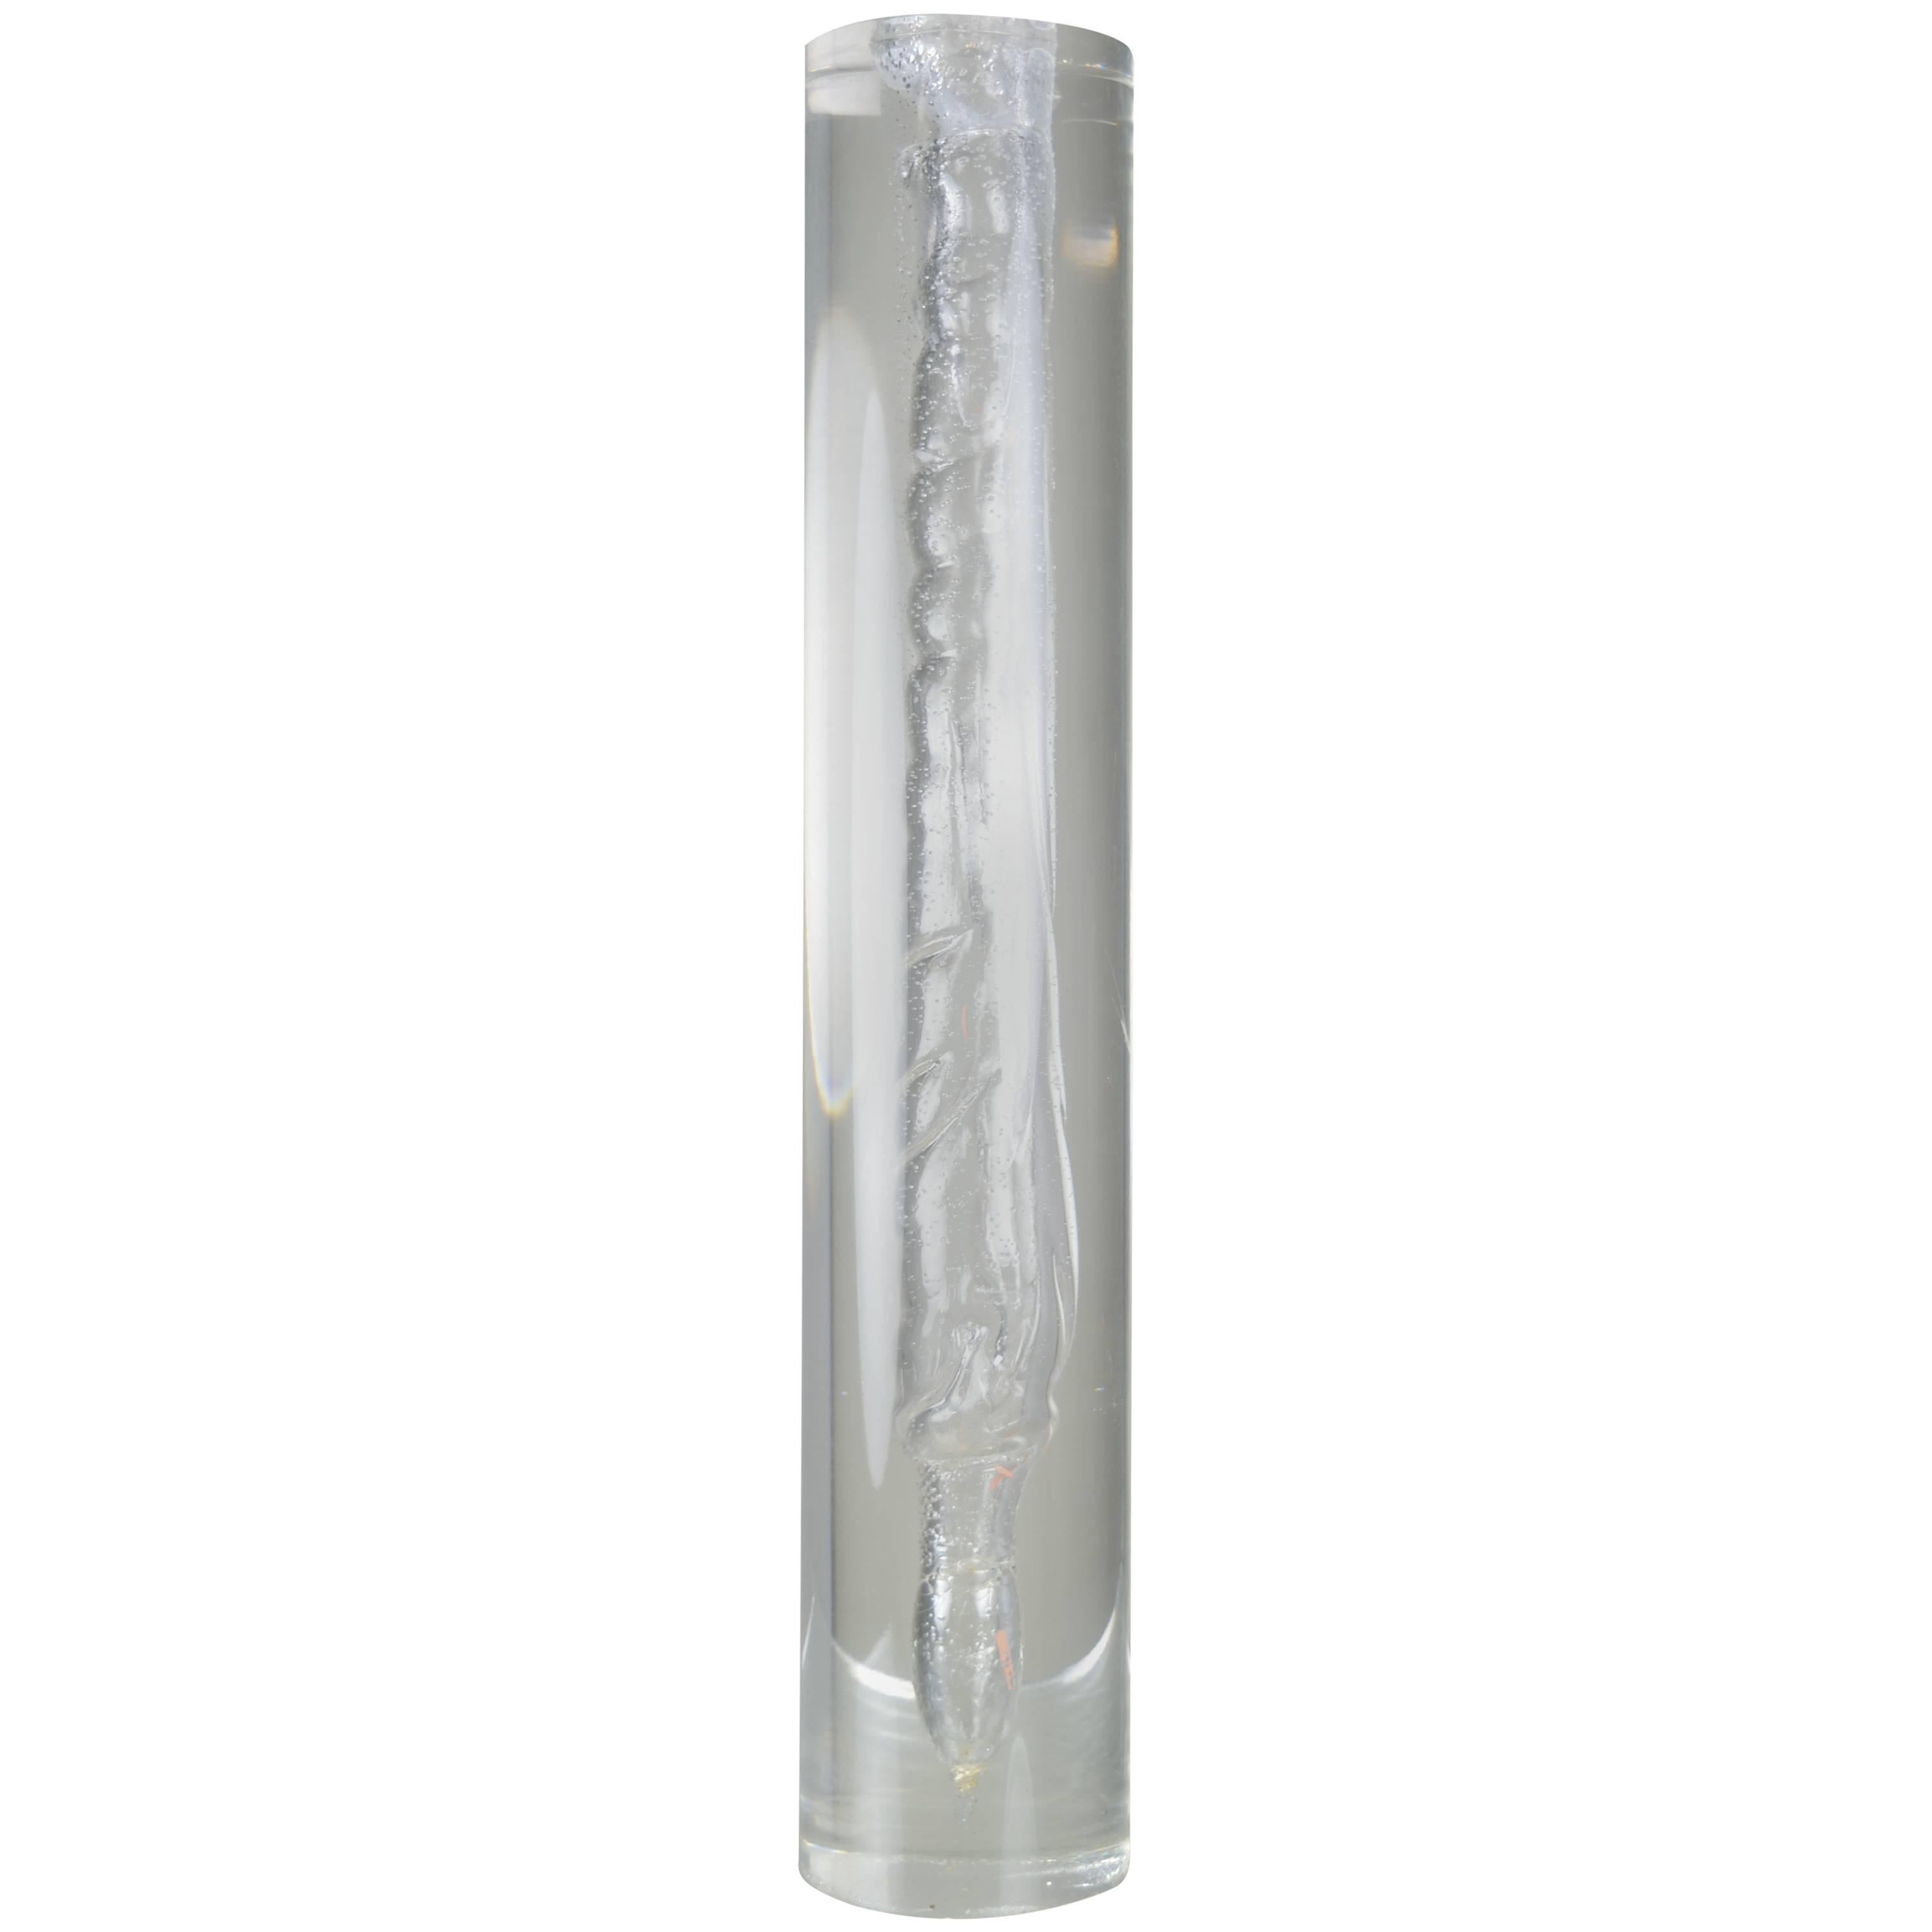 Large Cylindrical Lucite Vase, circa 1970s